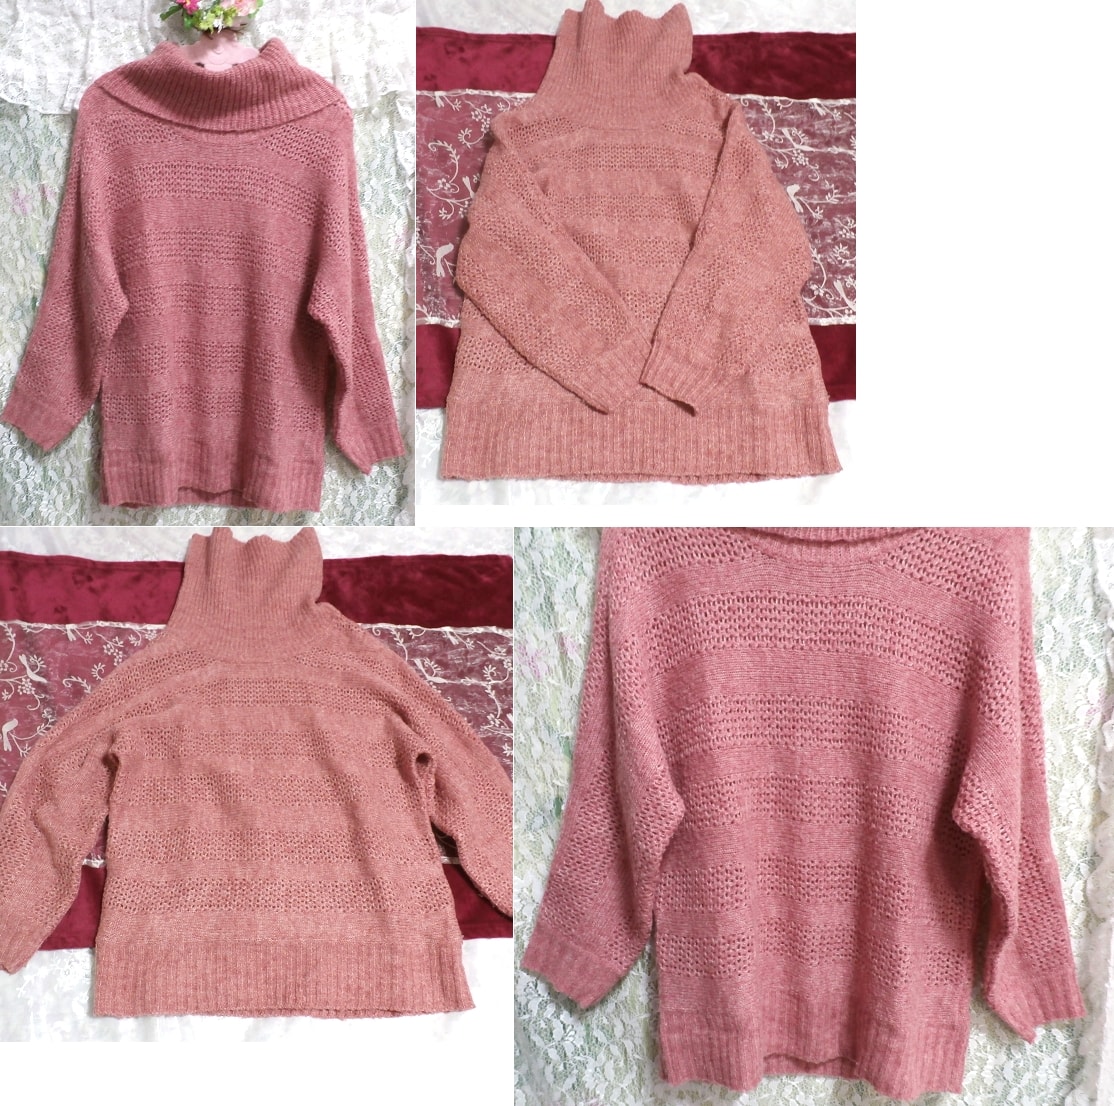 Pull rose rose en tricot, tricoter, pull-over, manche longue, taille m